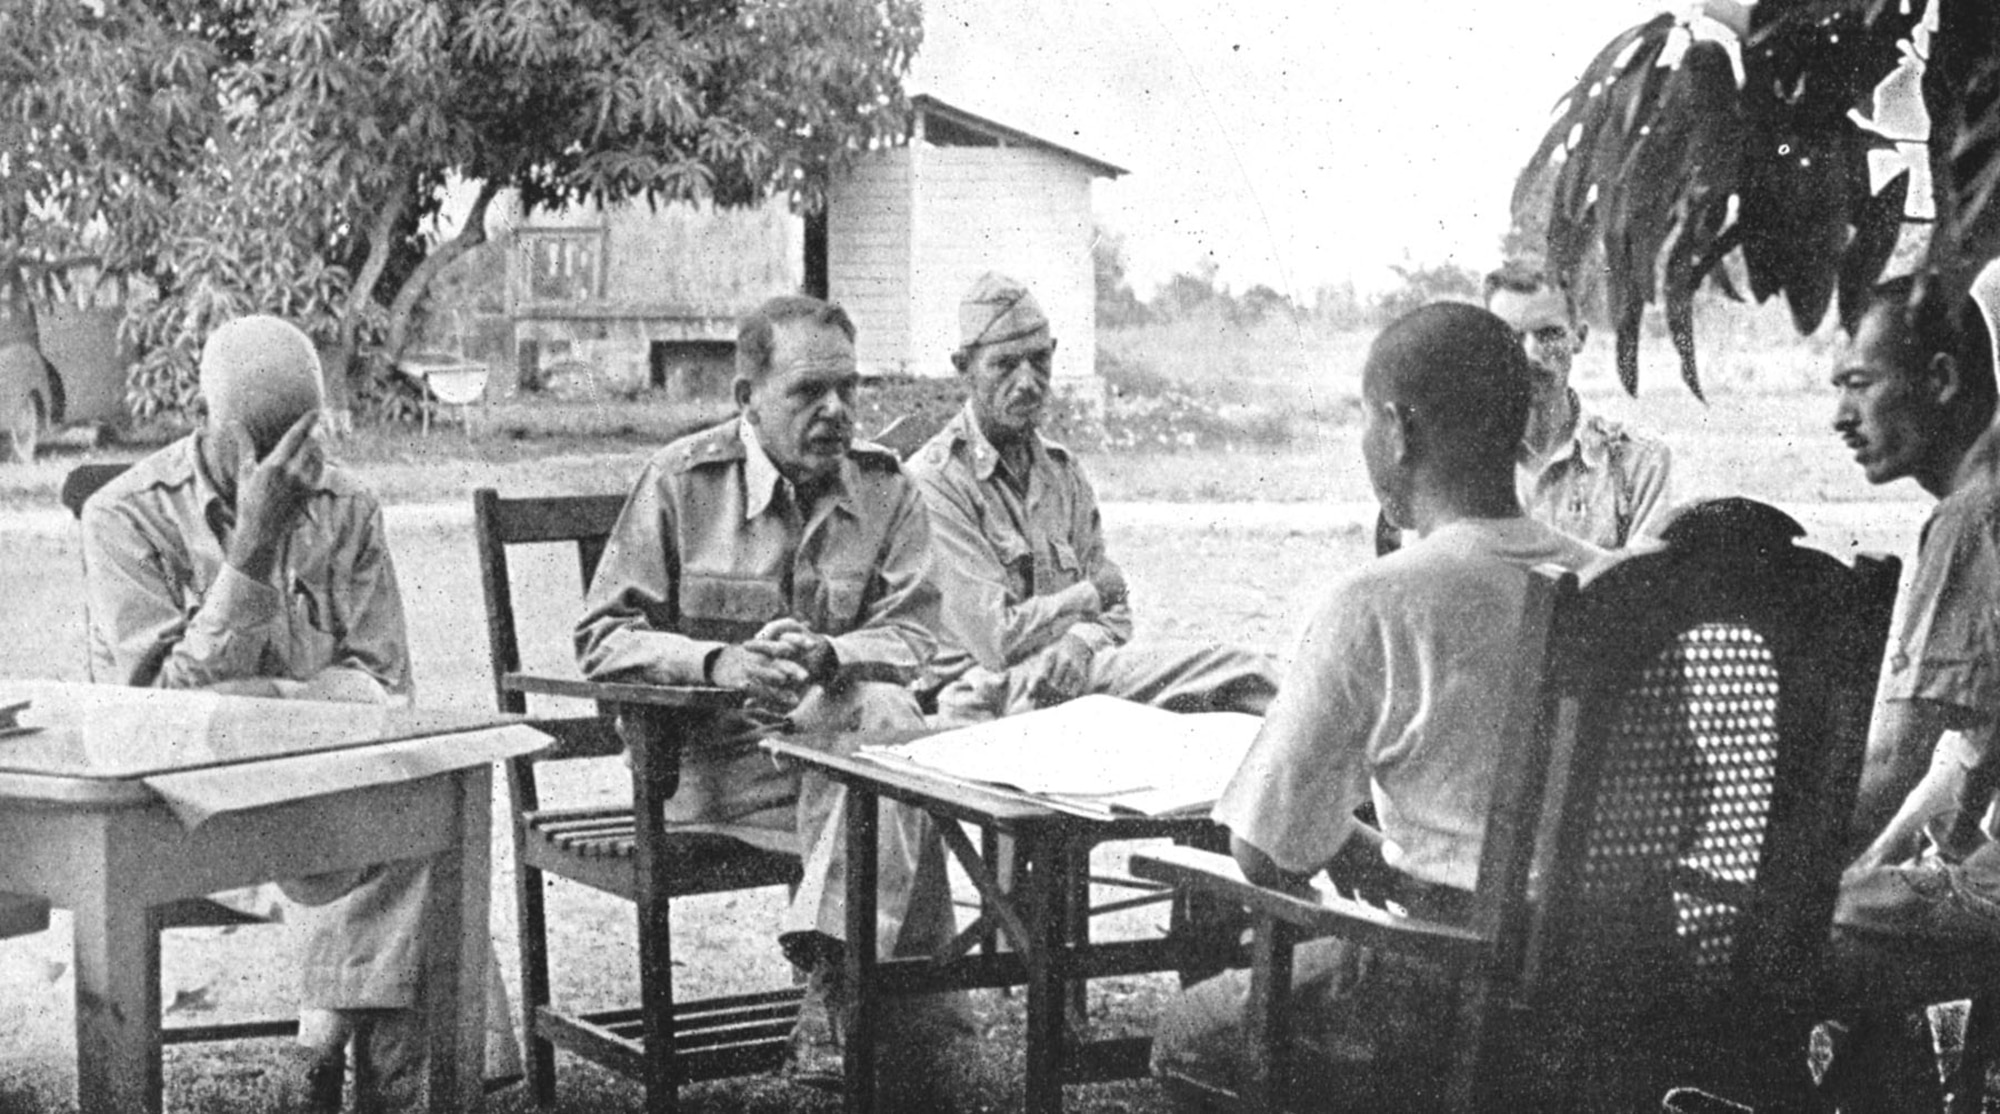 Discussing surrender terms with the Japanese representative, Col. Nakayama. Facing, left to right, are Col. Everett Williams, Maj. Gen. Edward King Jr., Maj. Wade Cothran and Maj. Achille Tisdelle. (U.S. Air Force photo)